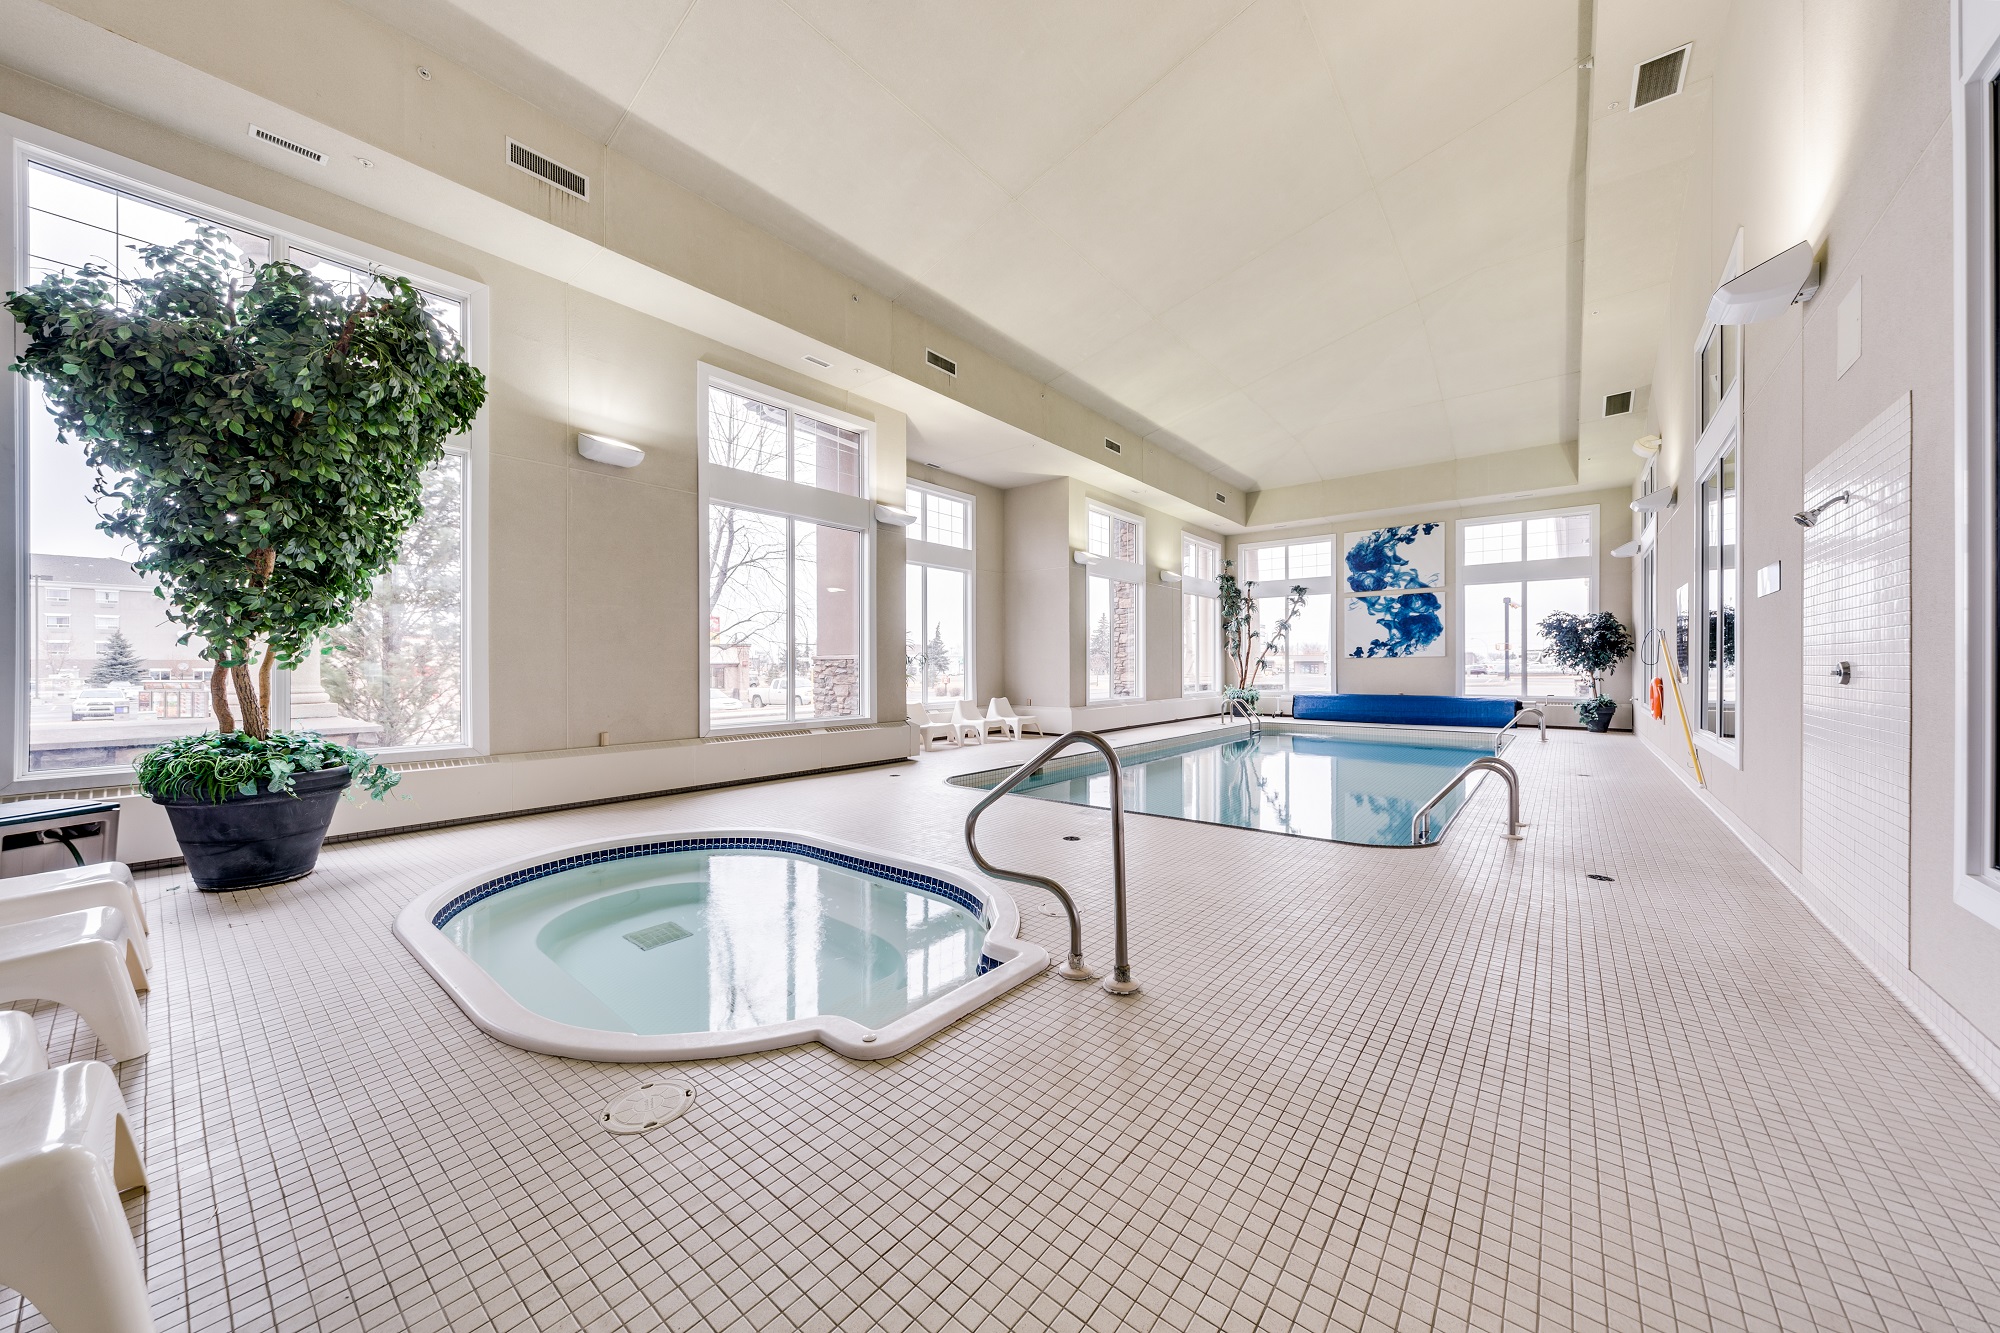 heritage-inn-suites_indoor-hot-tub-and-pool-resized